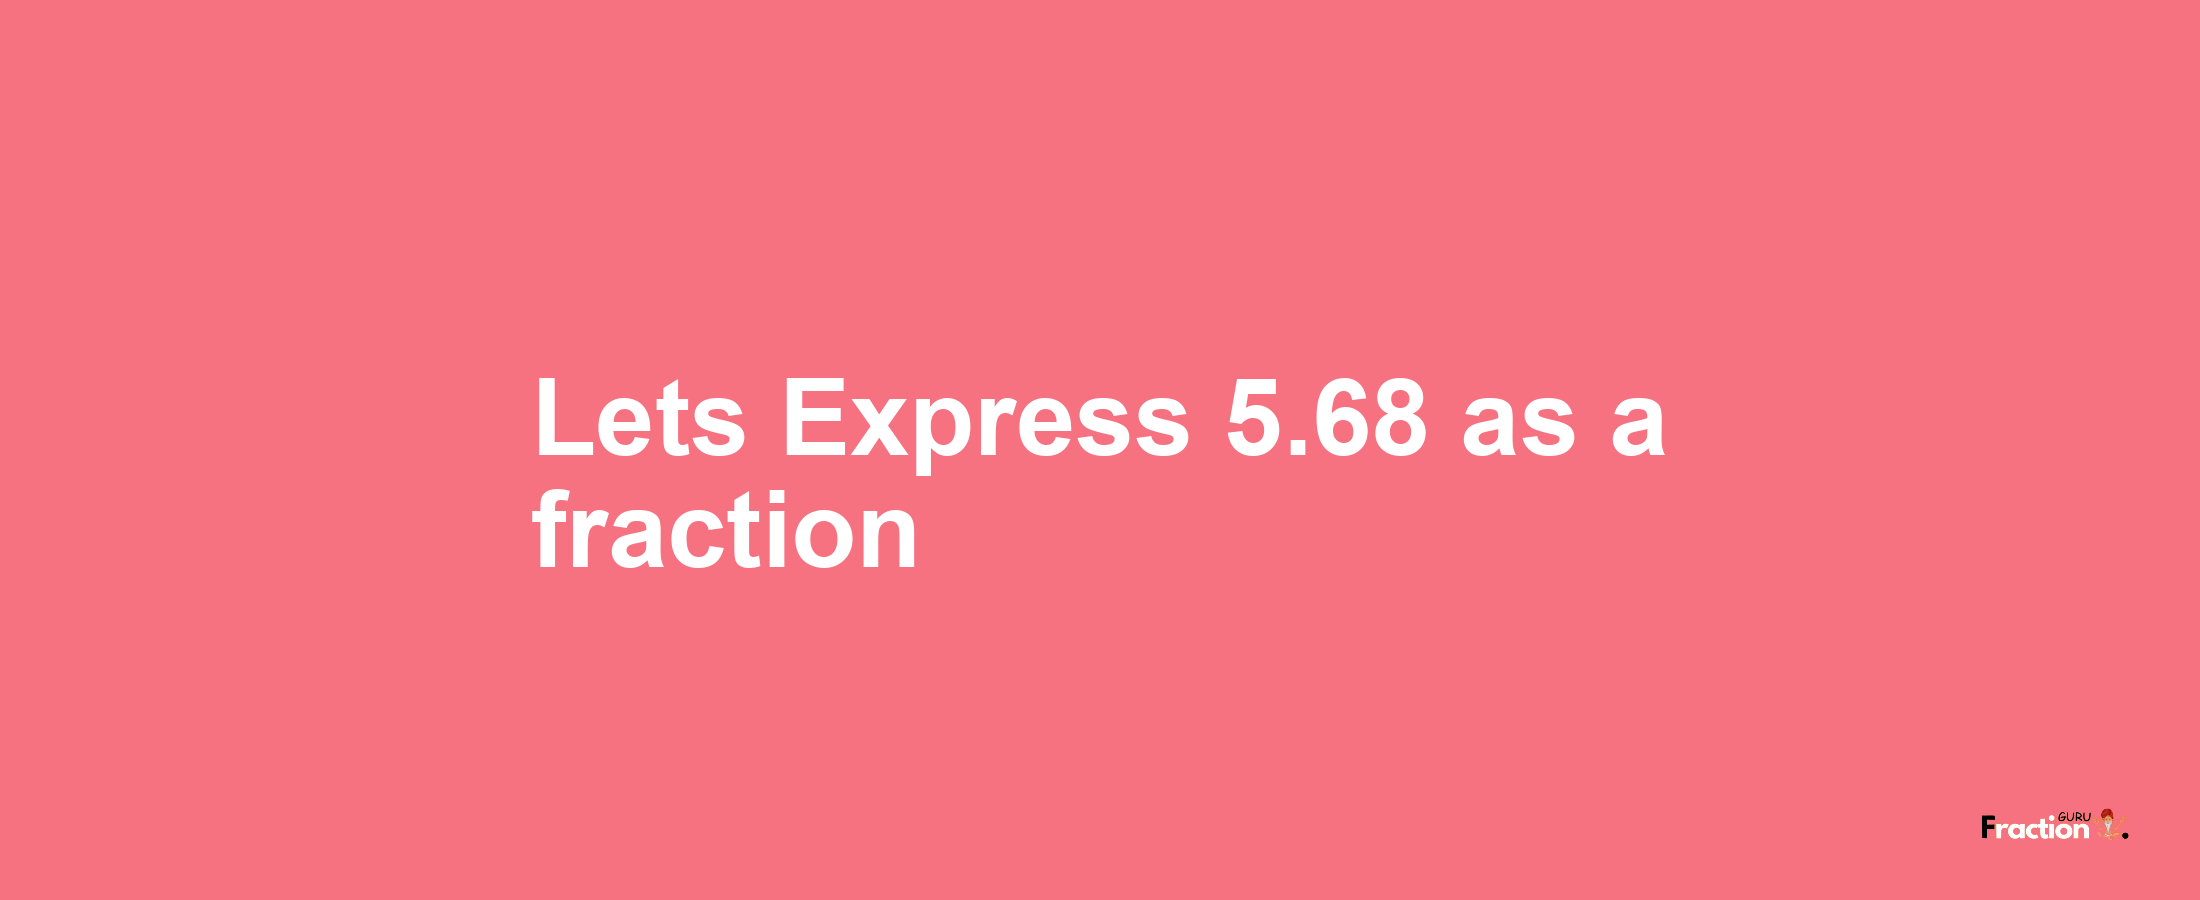 Lets Express 5.68 as afraction